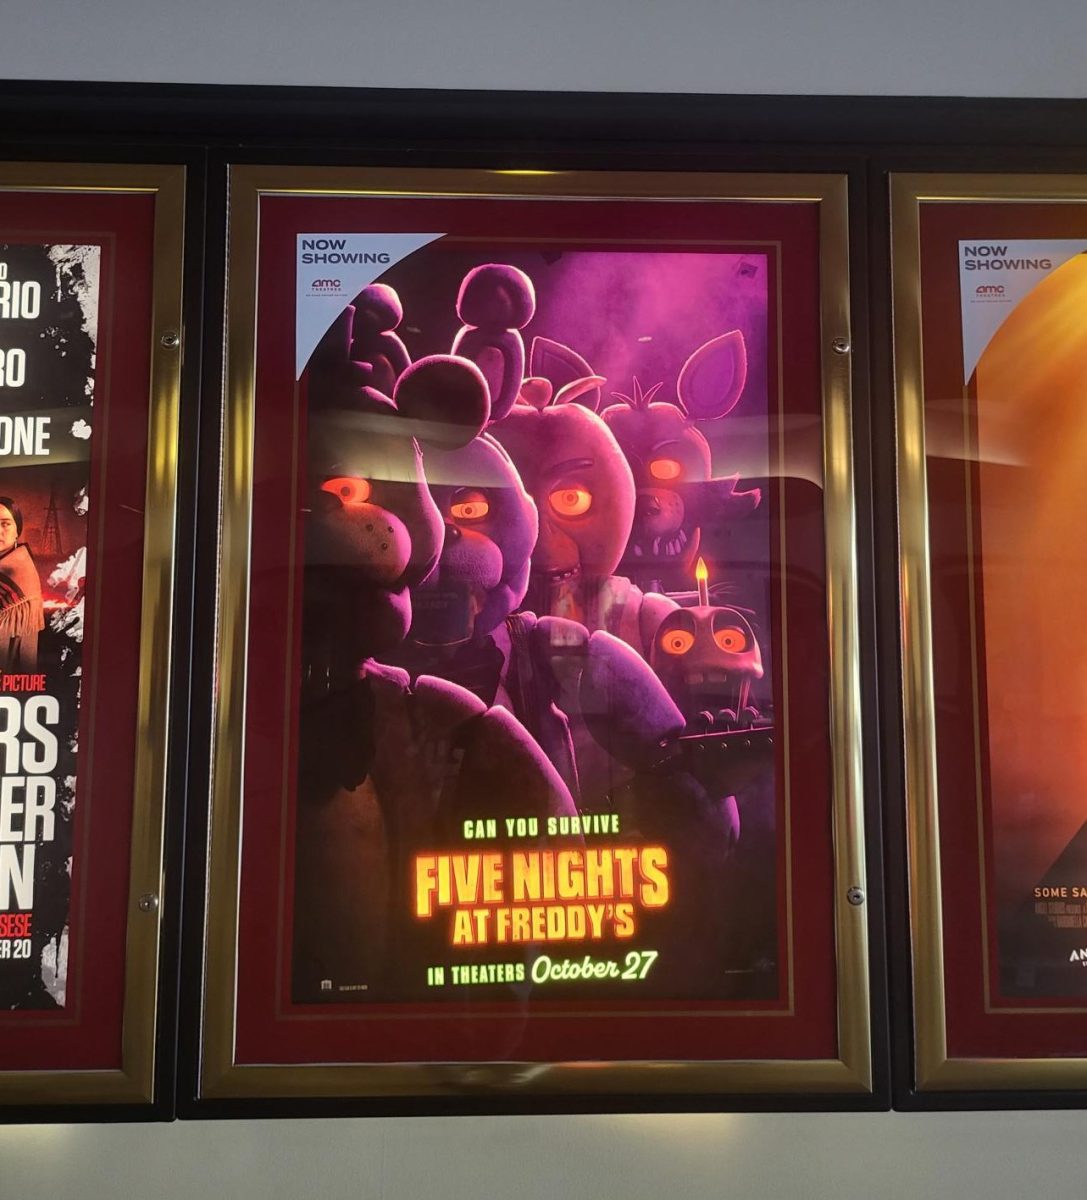 The Five Nights at Freddys poster shines like a beacon for all fans to see.